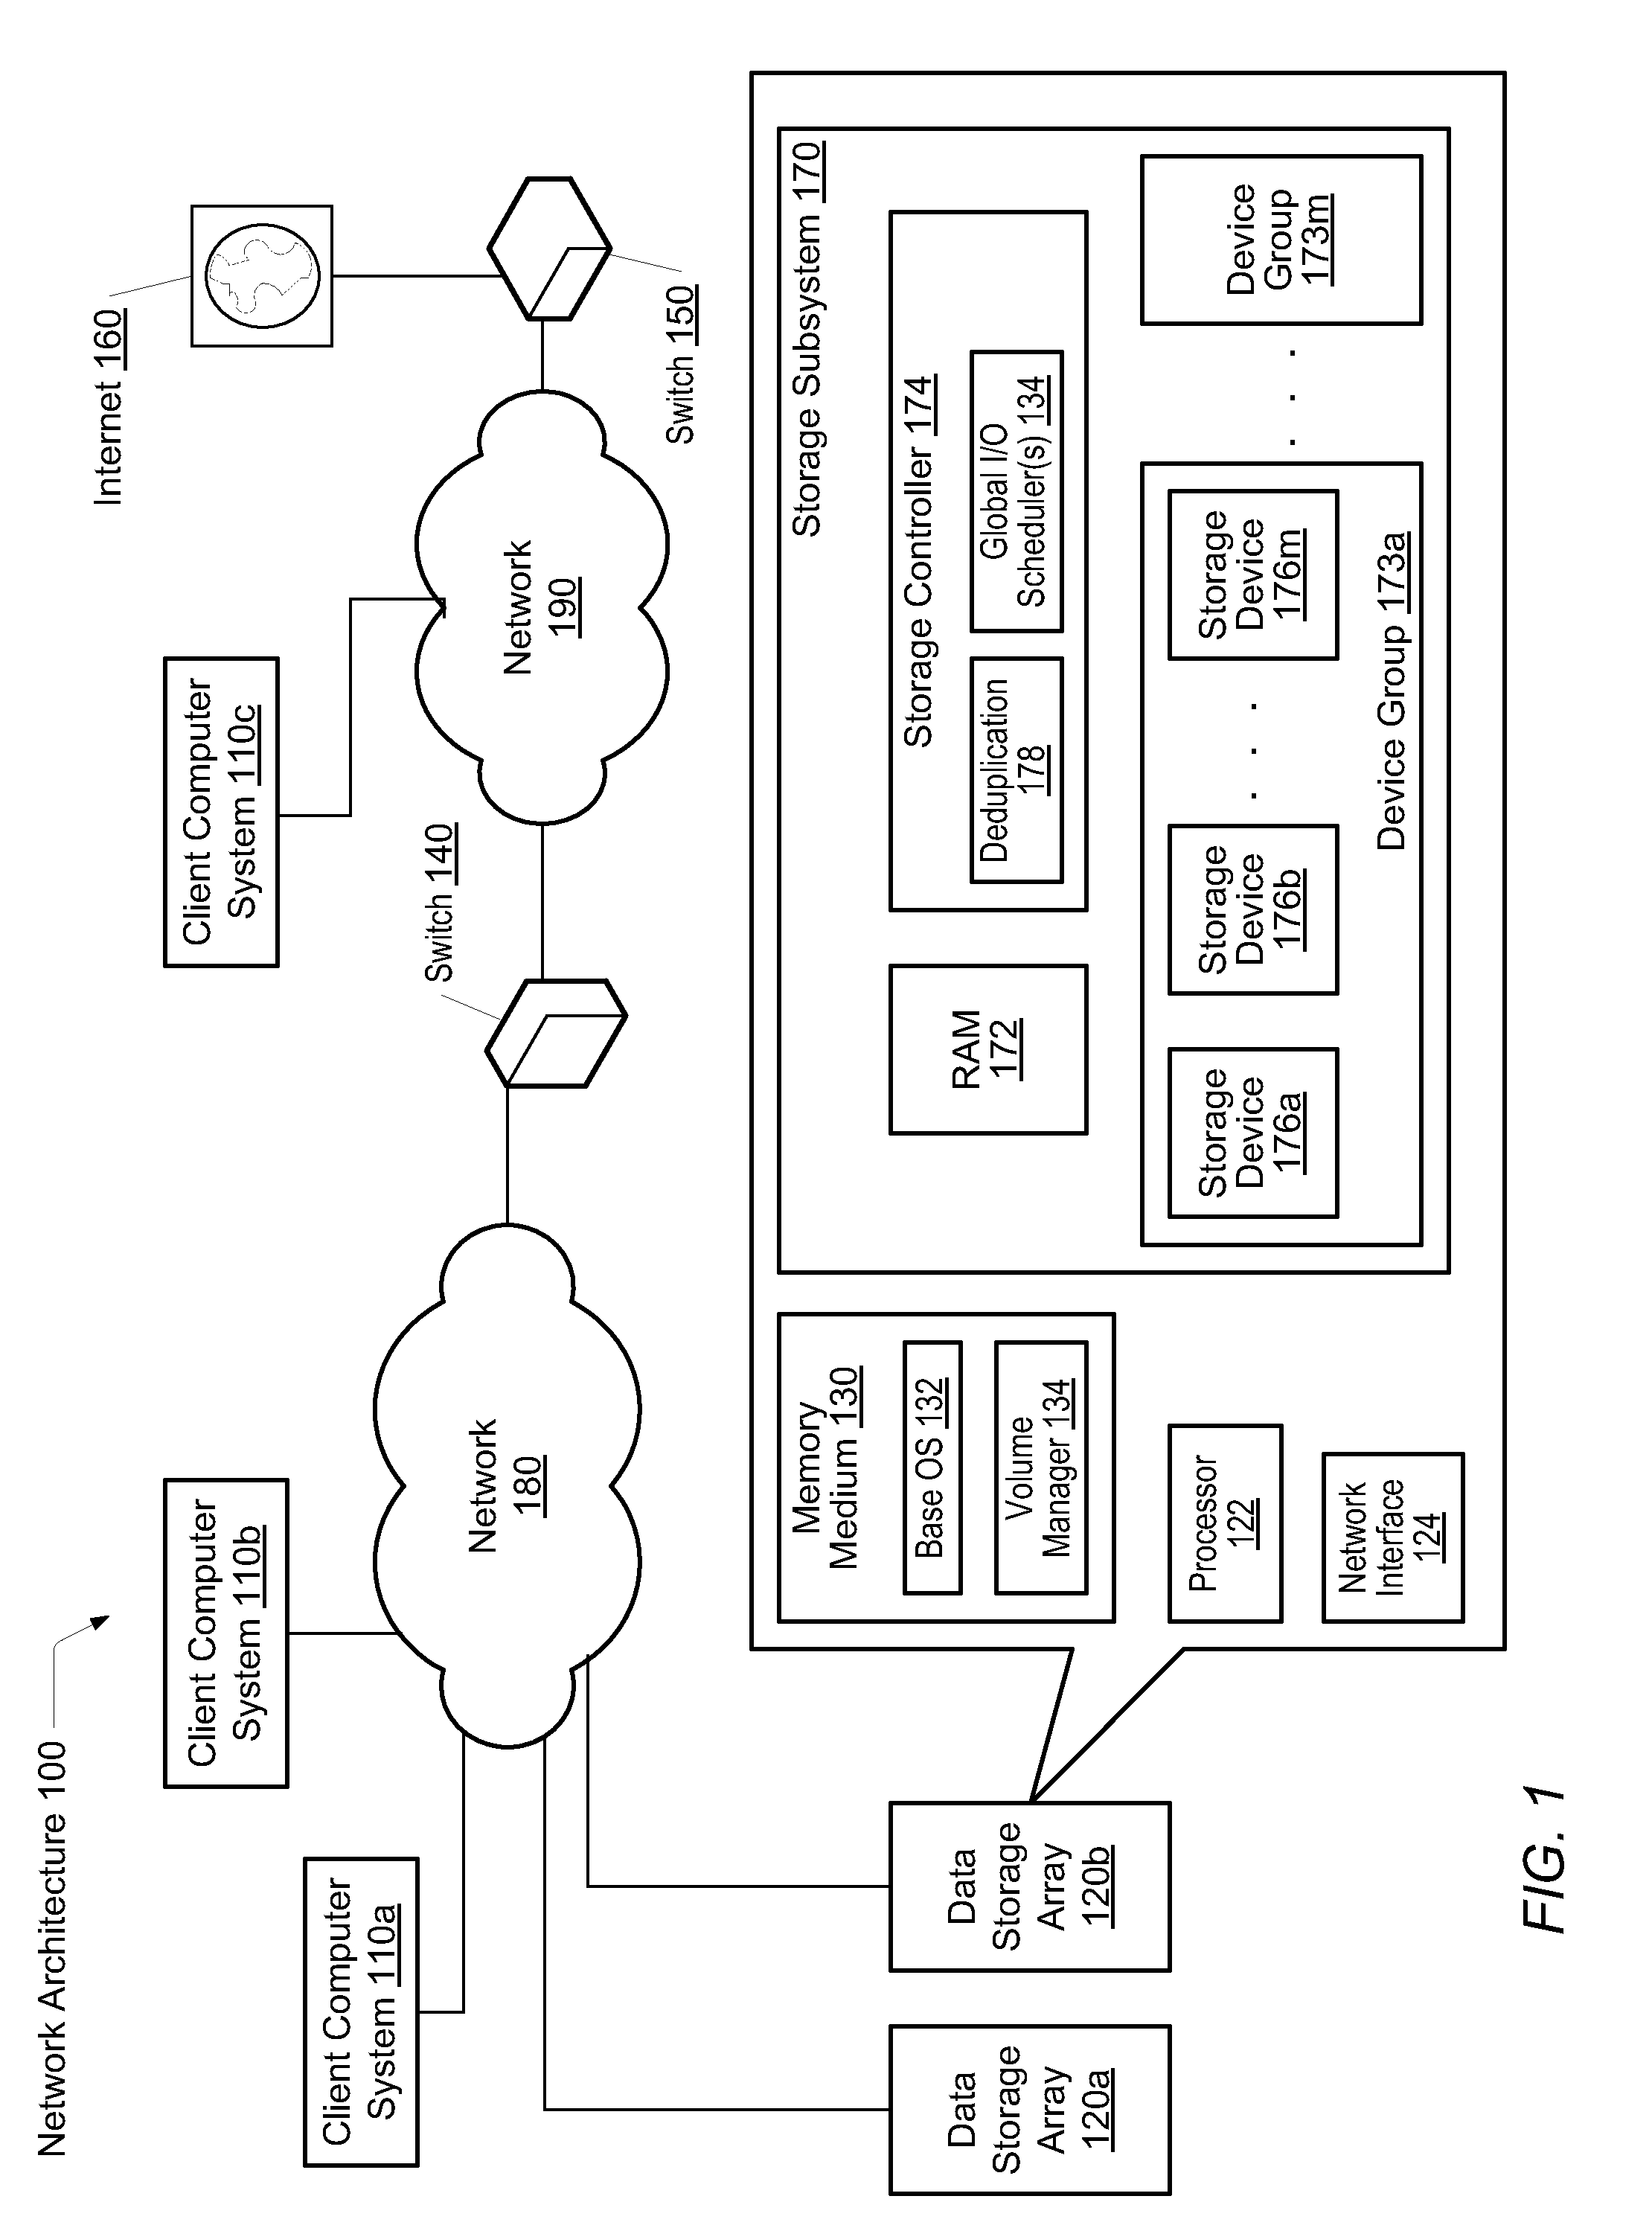 Variable length encoding in a storage system